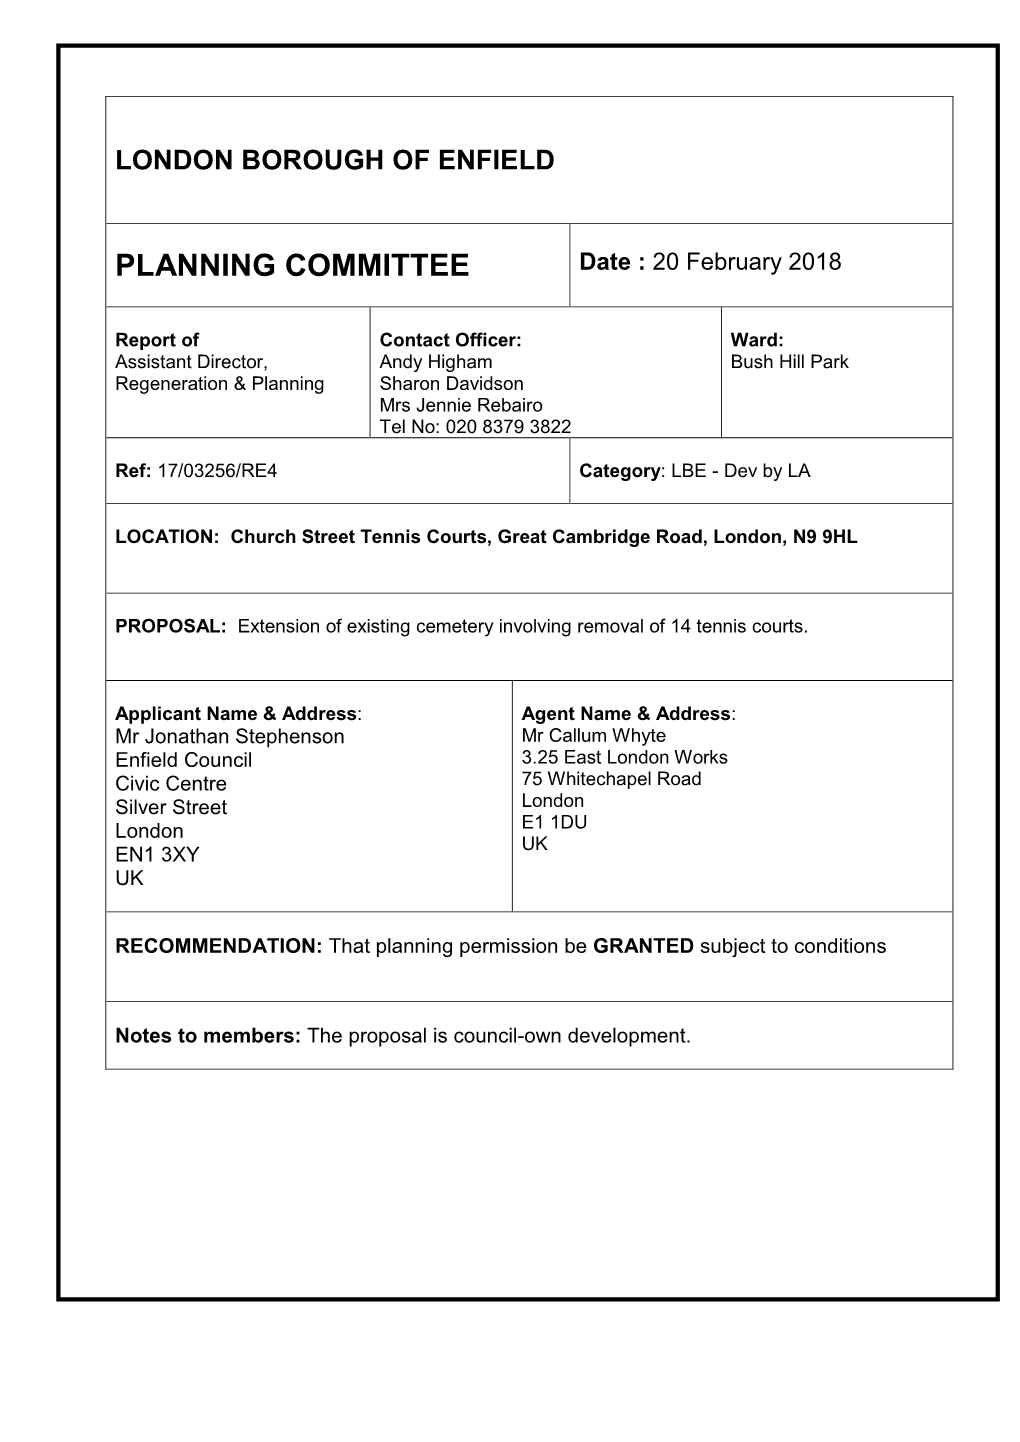 PLANNING COMMITTEE Date : 20 February 2018